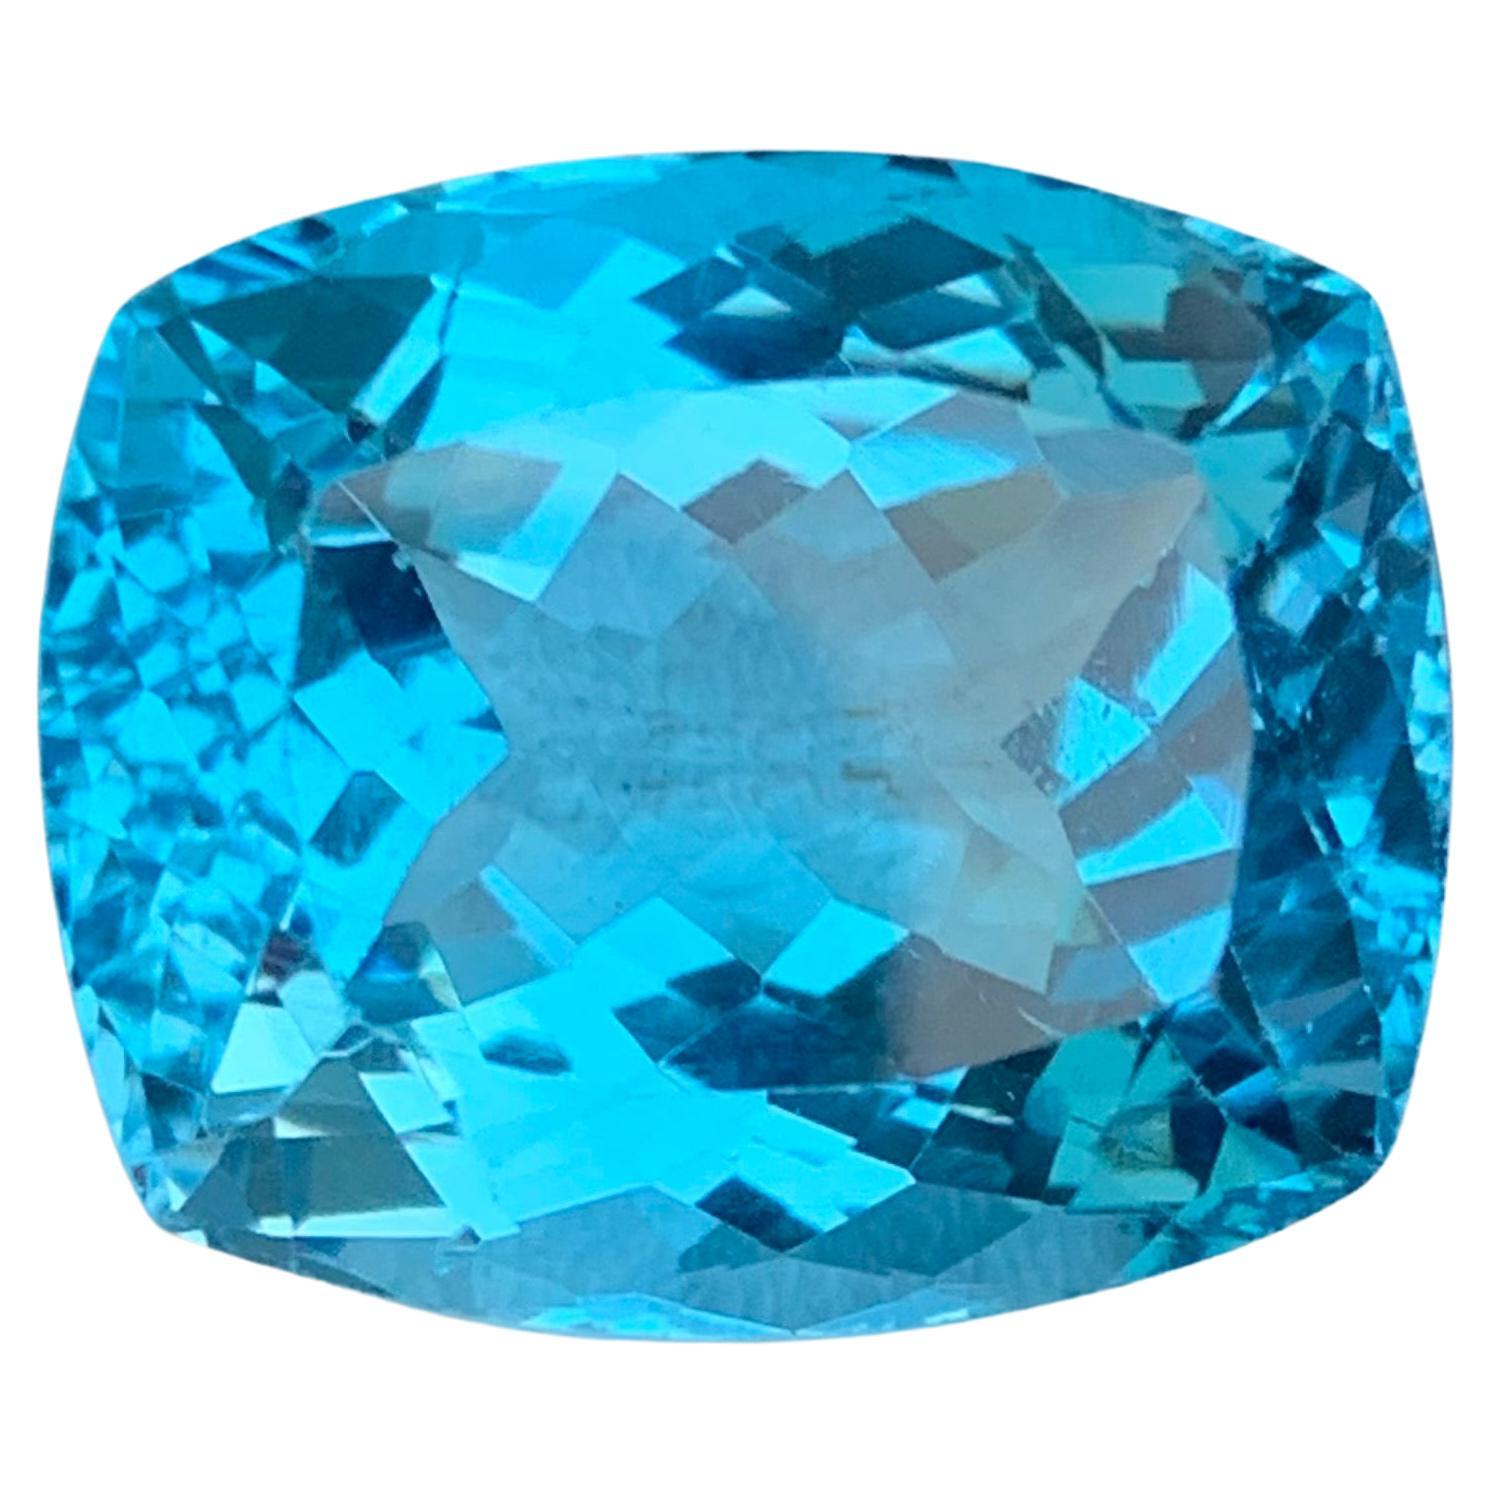 Gorgeous 31.10 Carat Loose Blue Topaz from Brazil Long Cushion Cut for Jewelry